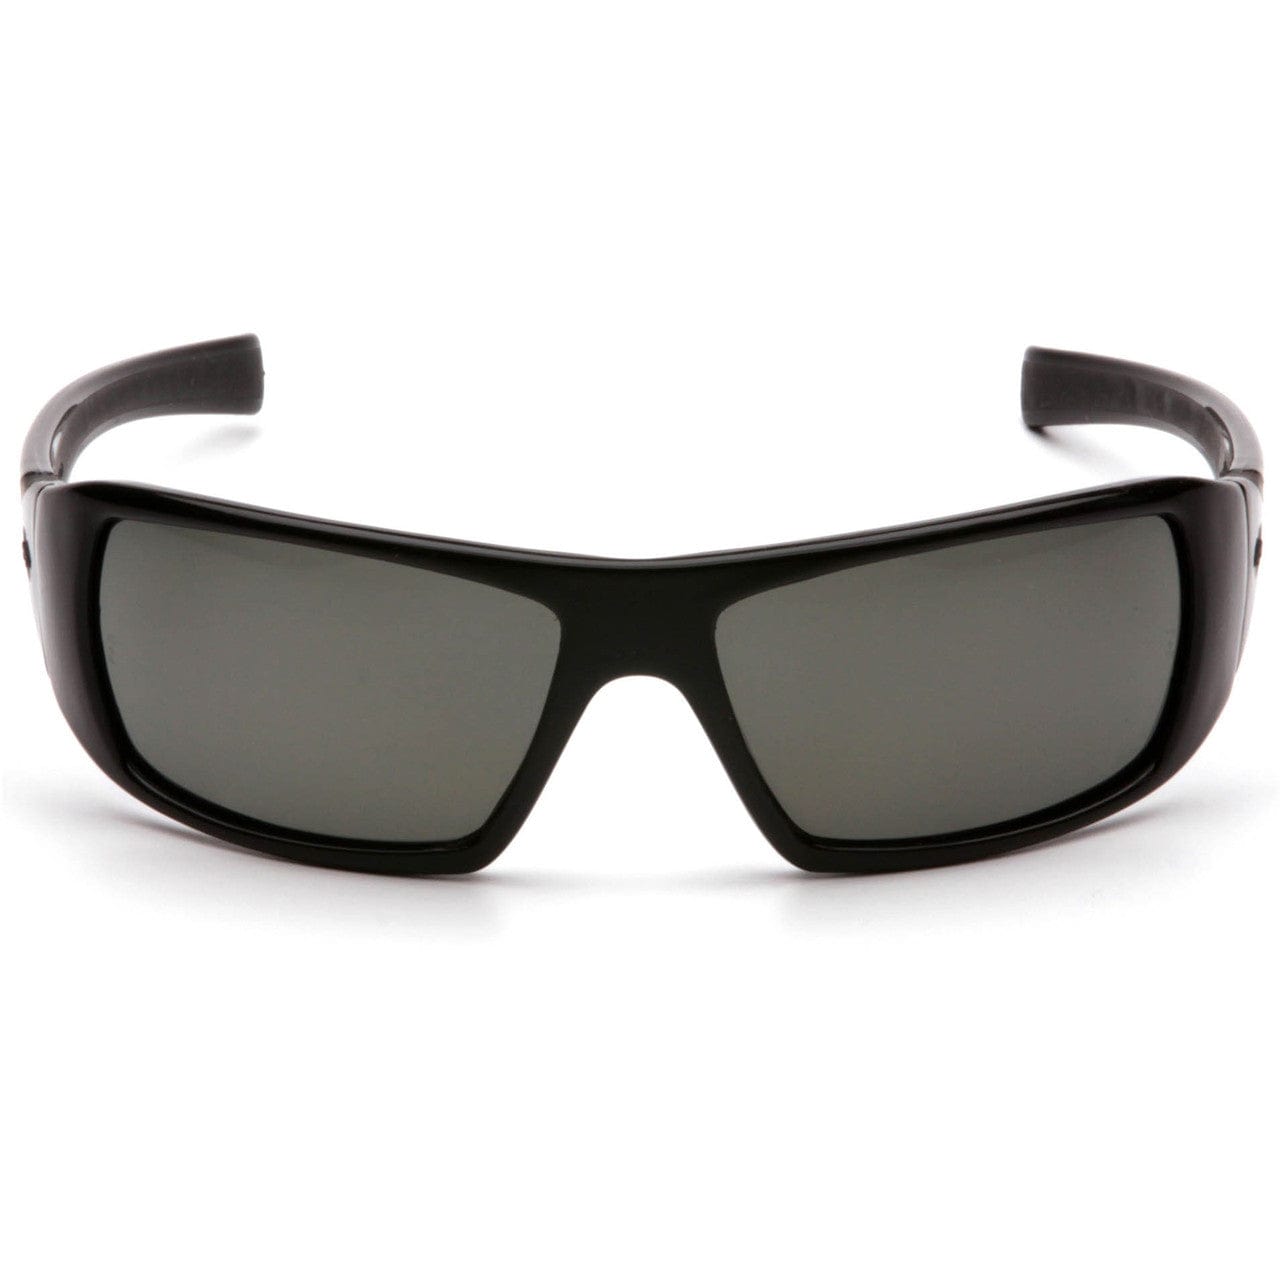 Pyramex Goliath Safety Glasses with Black Frame and Gray Polarized Lens SB5621D Front View